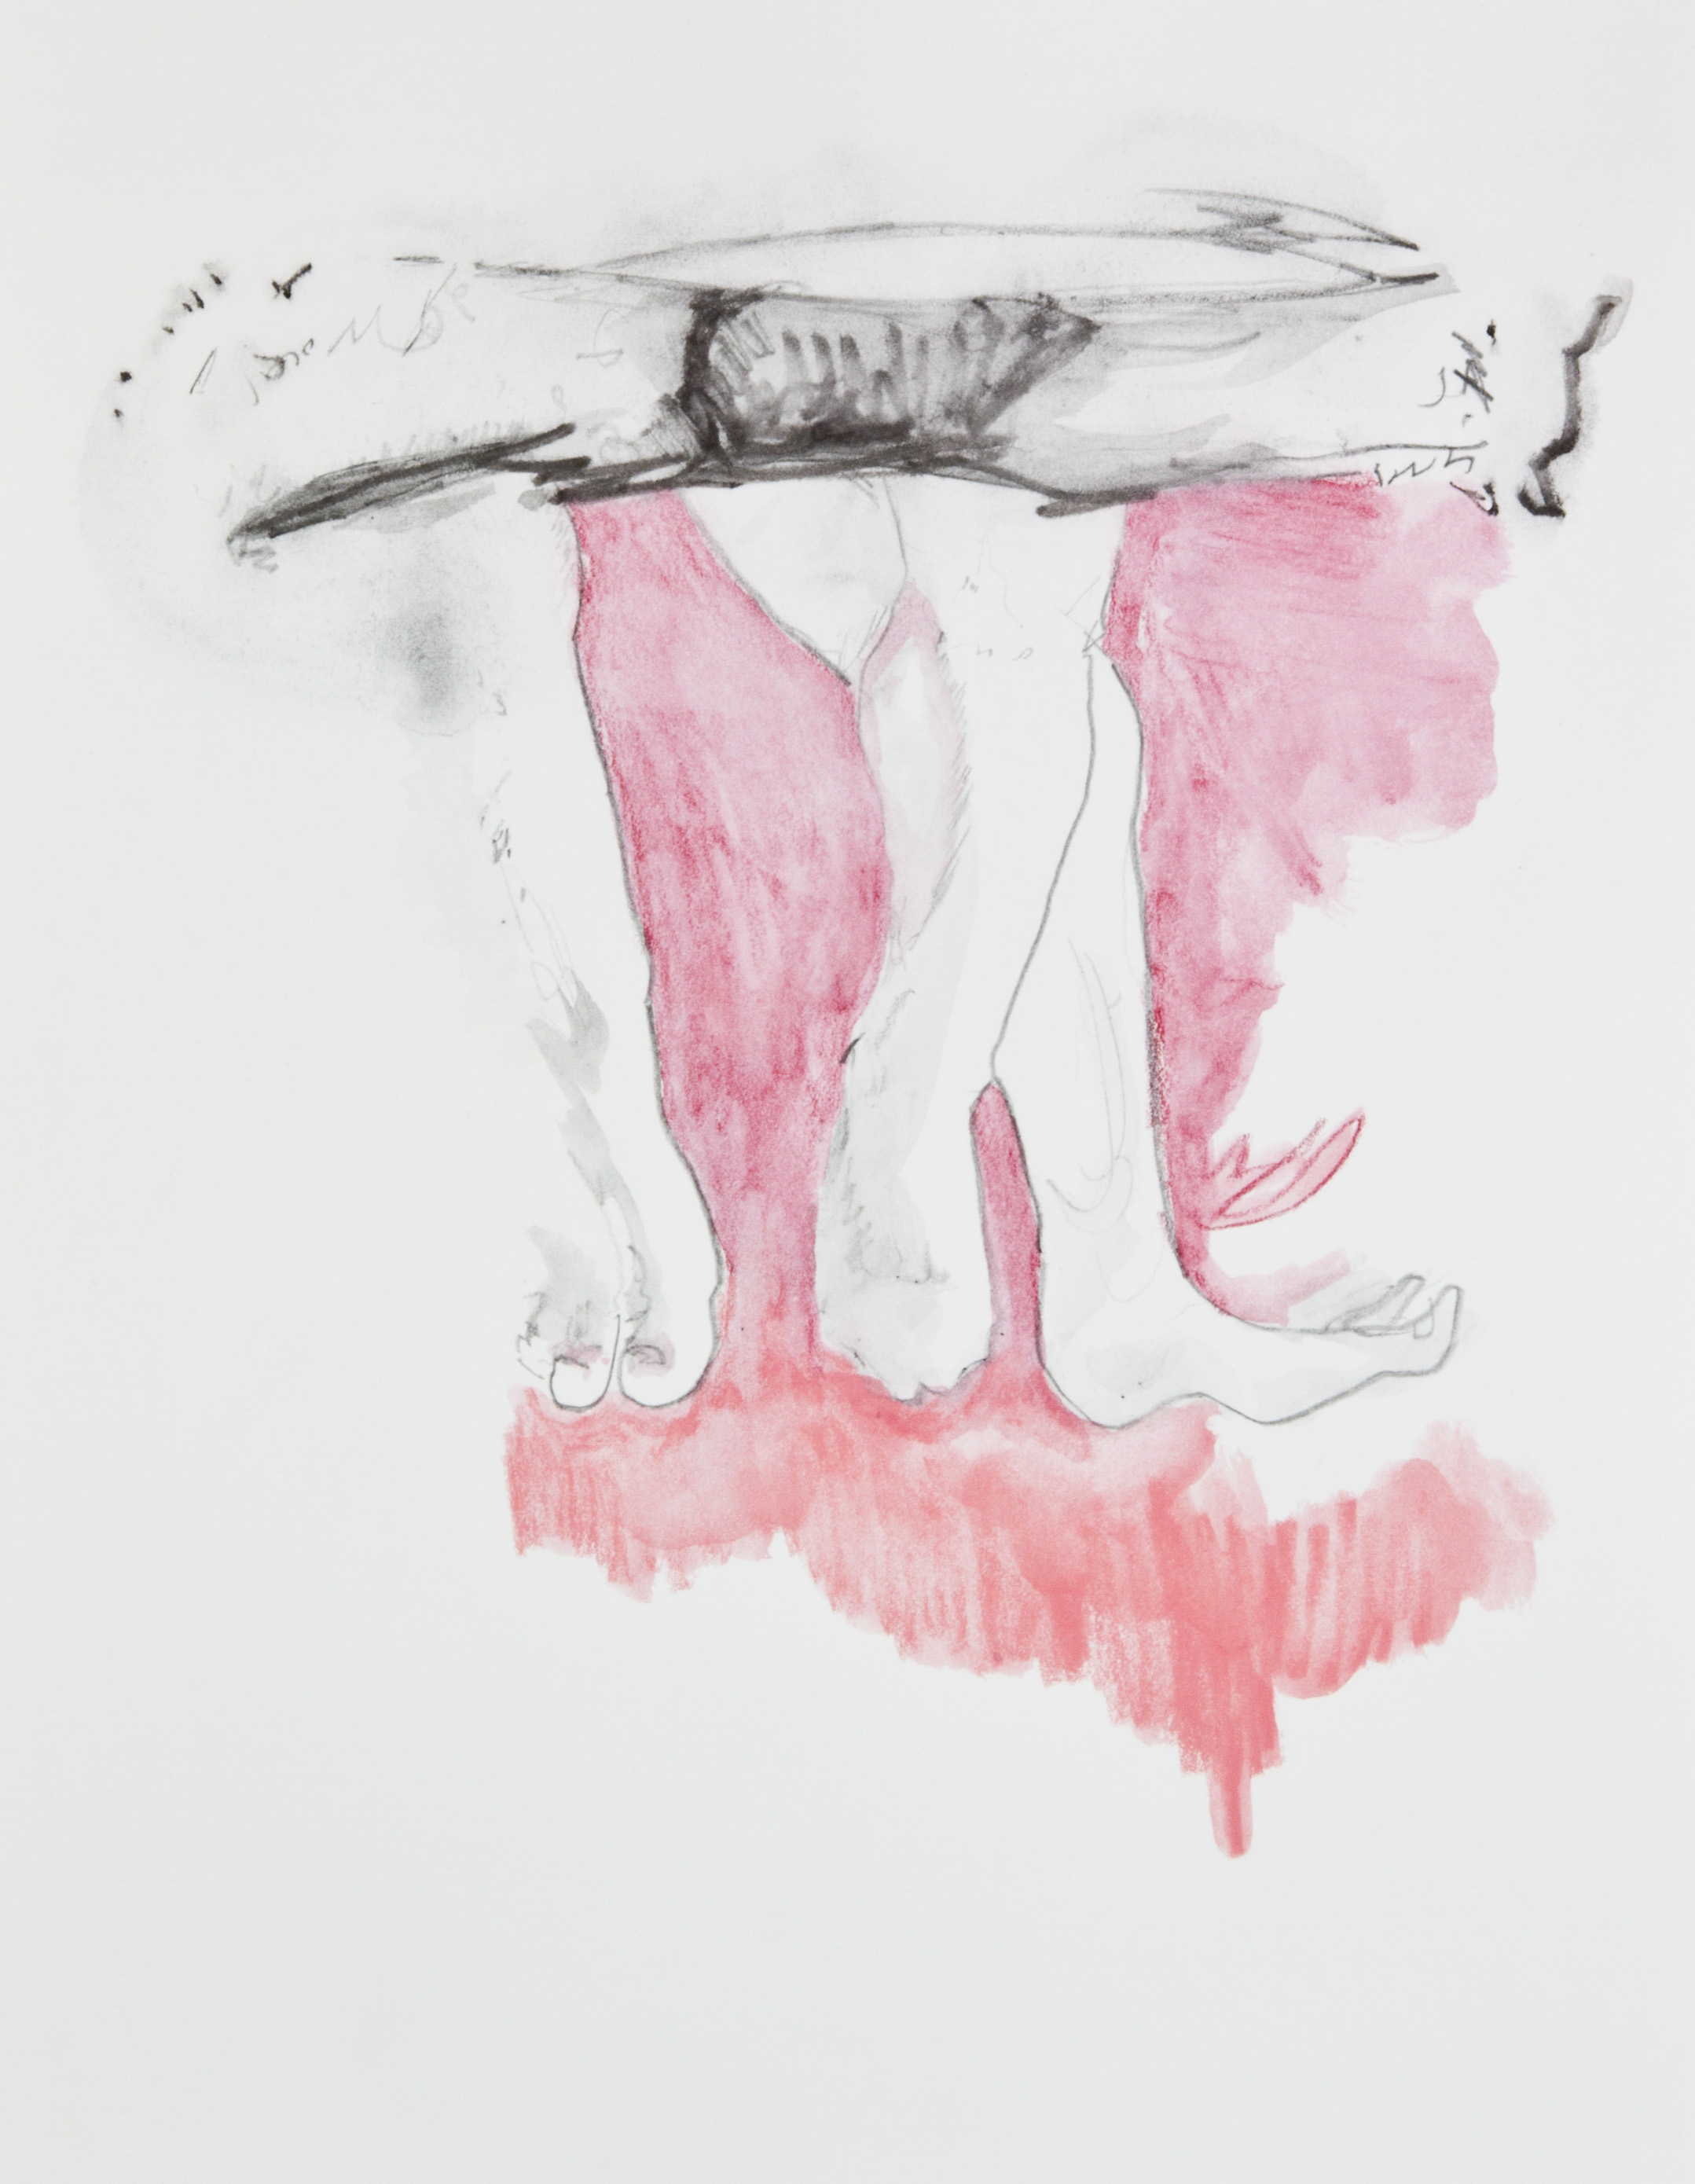 We Dangle In Place, 2013, graphite, crayon and watercolor pencil on paper, 11x14 inches